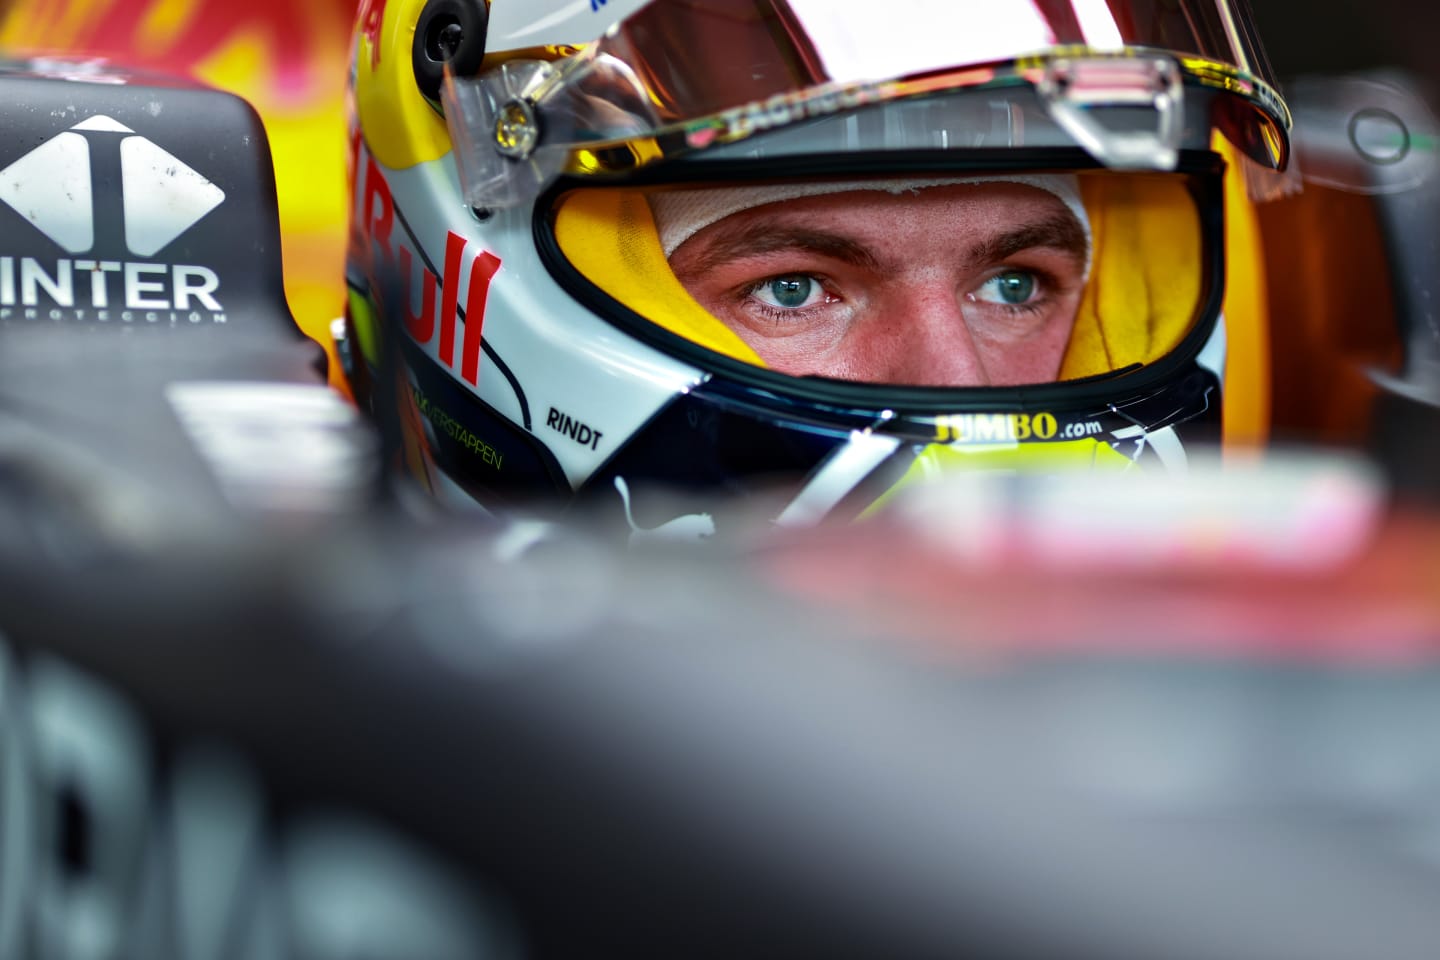 SPIELBERG, AUSTRIA - JUNE 25: Max Verstappen of Netherlands and Red Bull Racing looks on from his car during practice ahead of the F1 Grand Prix of Styria at Red Bull Ring on June 25, 2021 in Spielberg, Austria. (Photo by Mark Thompson/Getty Images)